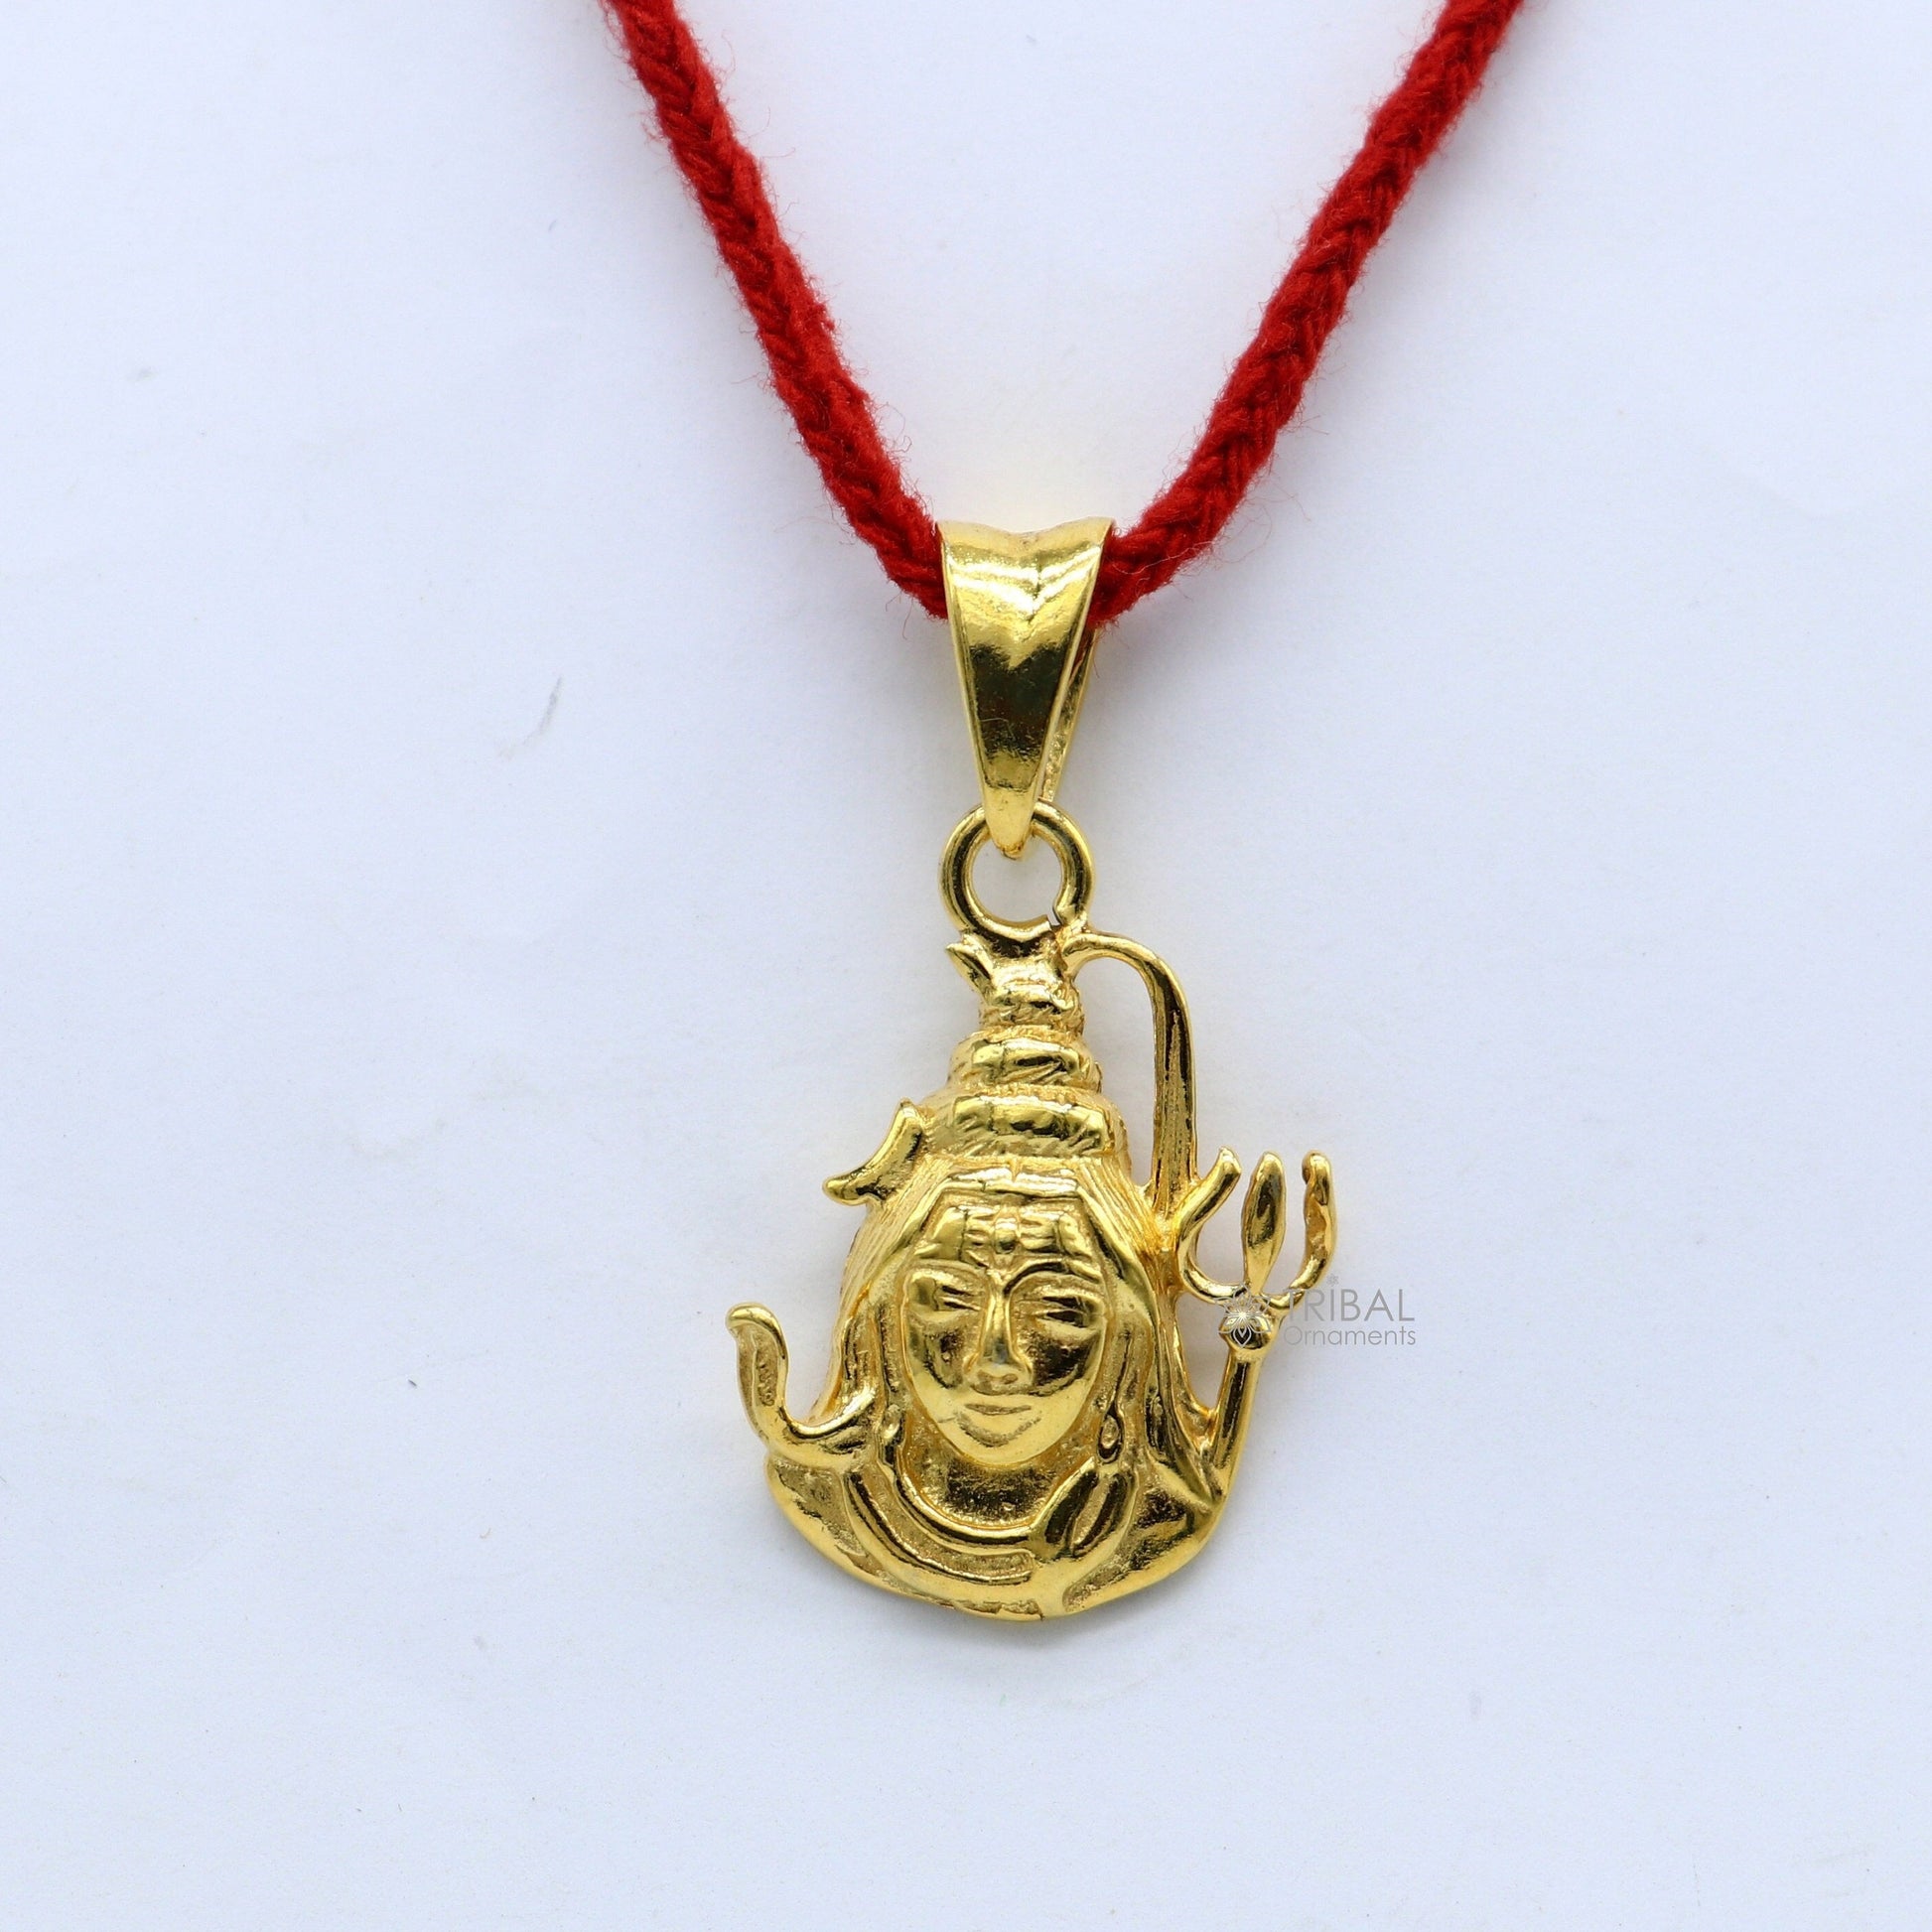 925 sterling silver unique gold polished design idols Lord Shiva pendant, excellent style pendant with trident  unisex divine jewelry nsp600 - TRIBAL ORNAMENTS